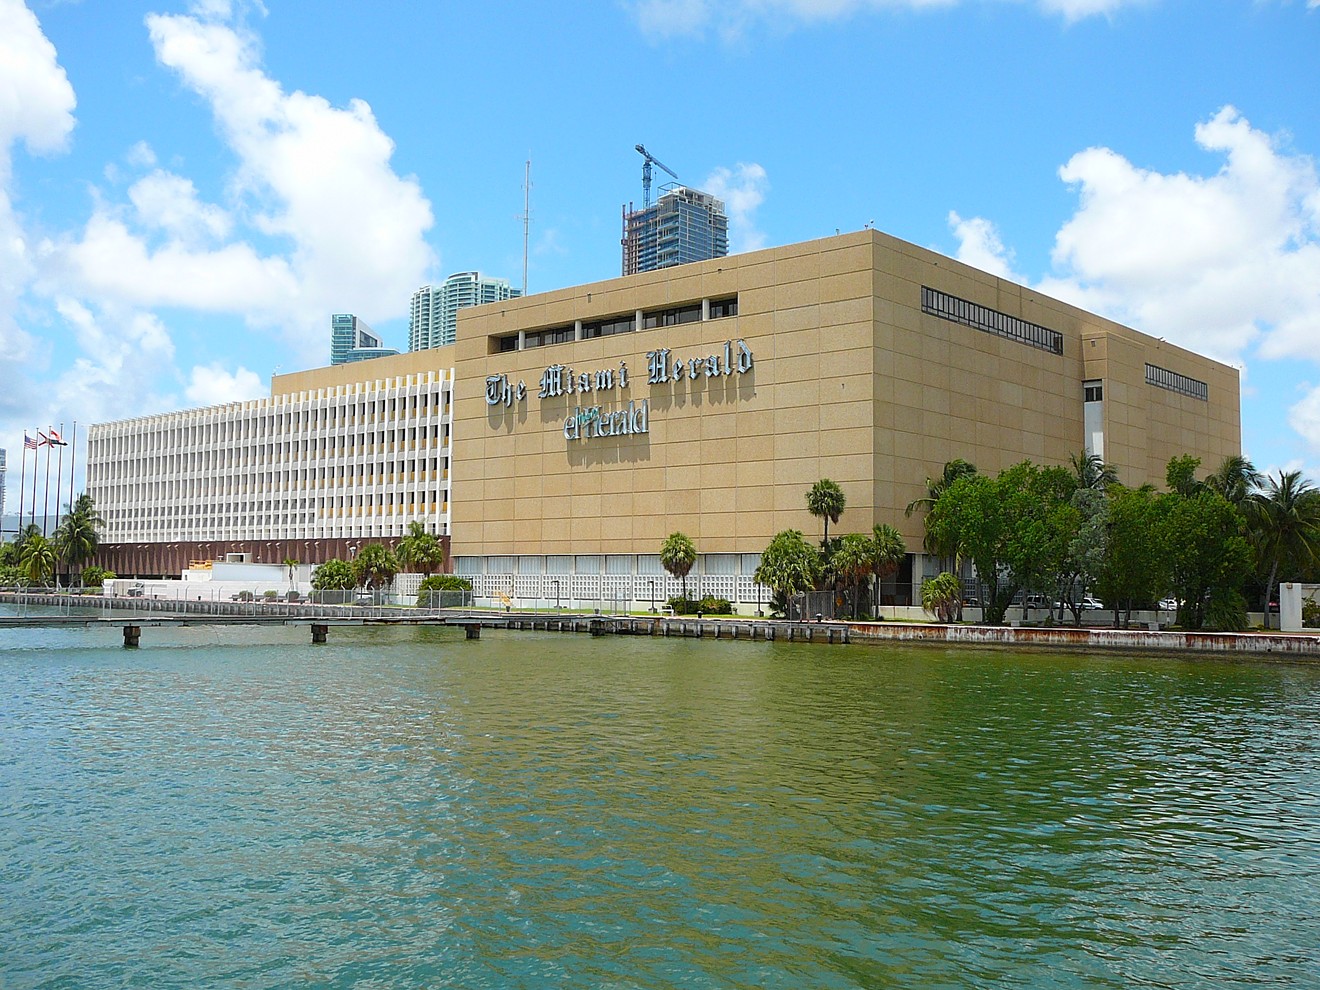 The longtime Miami Herald headquarters was demolished in 2015.